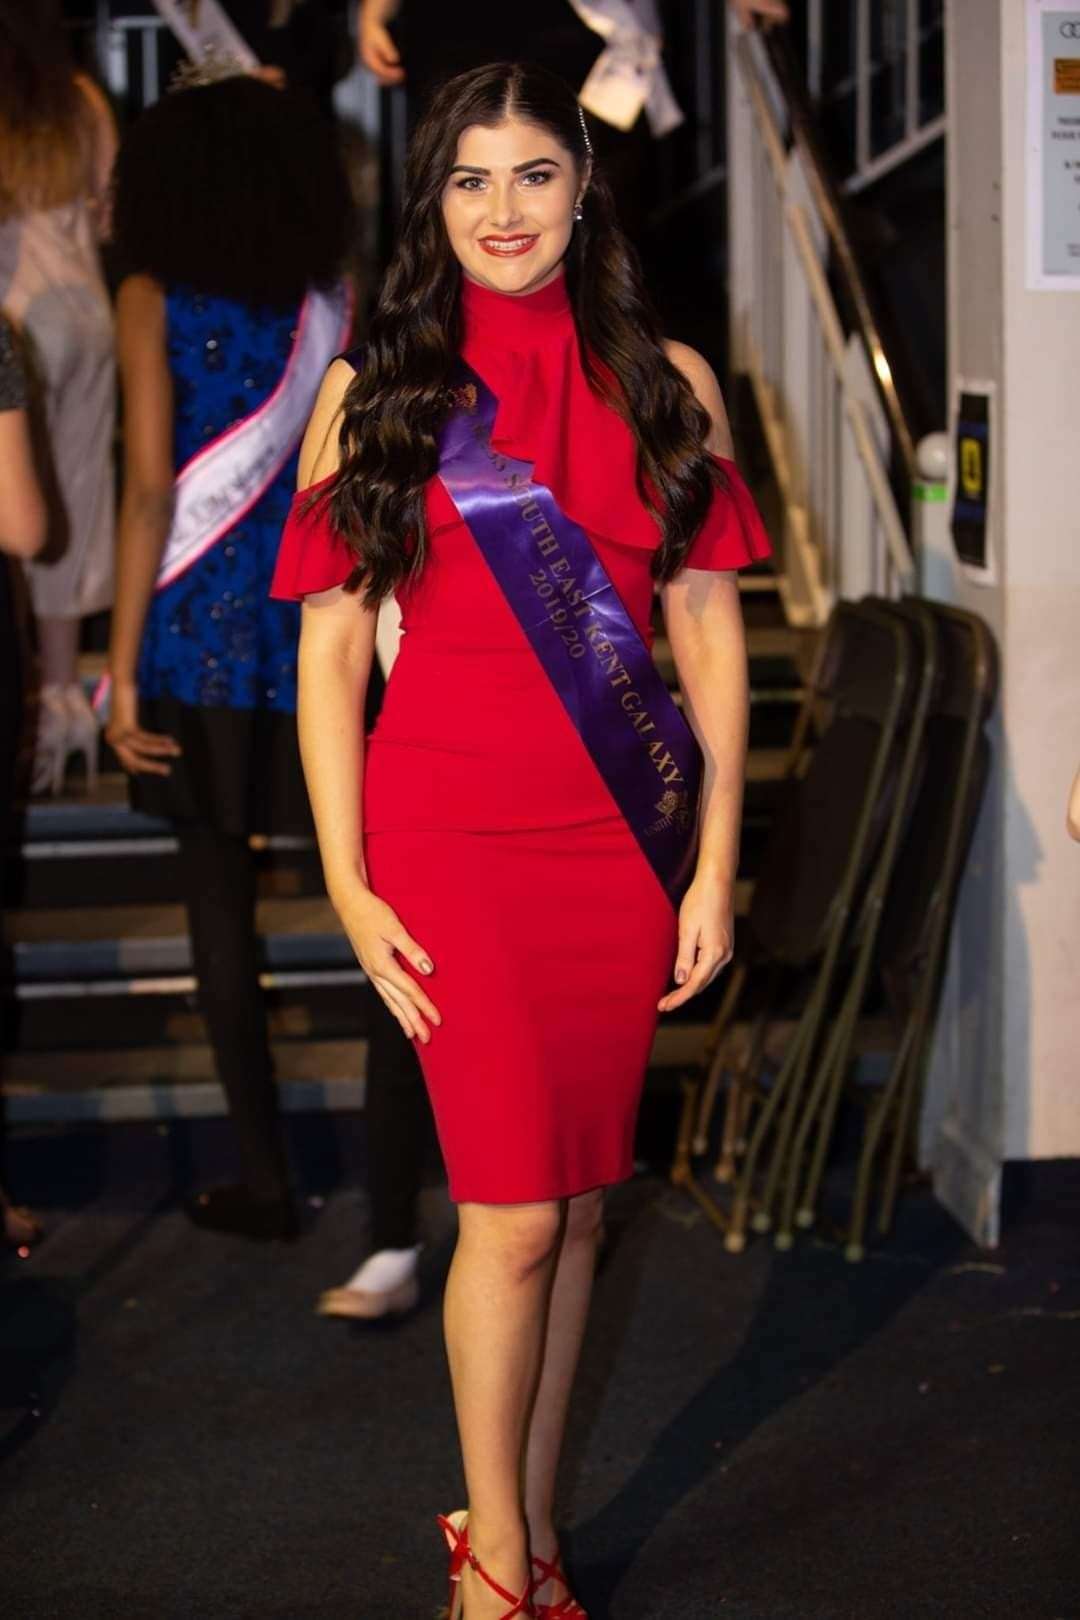 Ex Miss Deal Claudia Cousin is competing in a national pageant as Miss South East Kent Galaxy